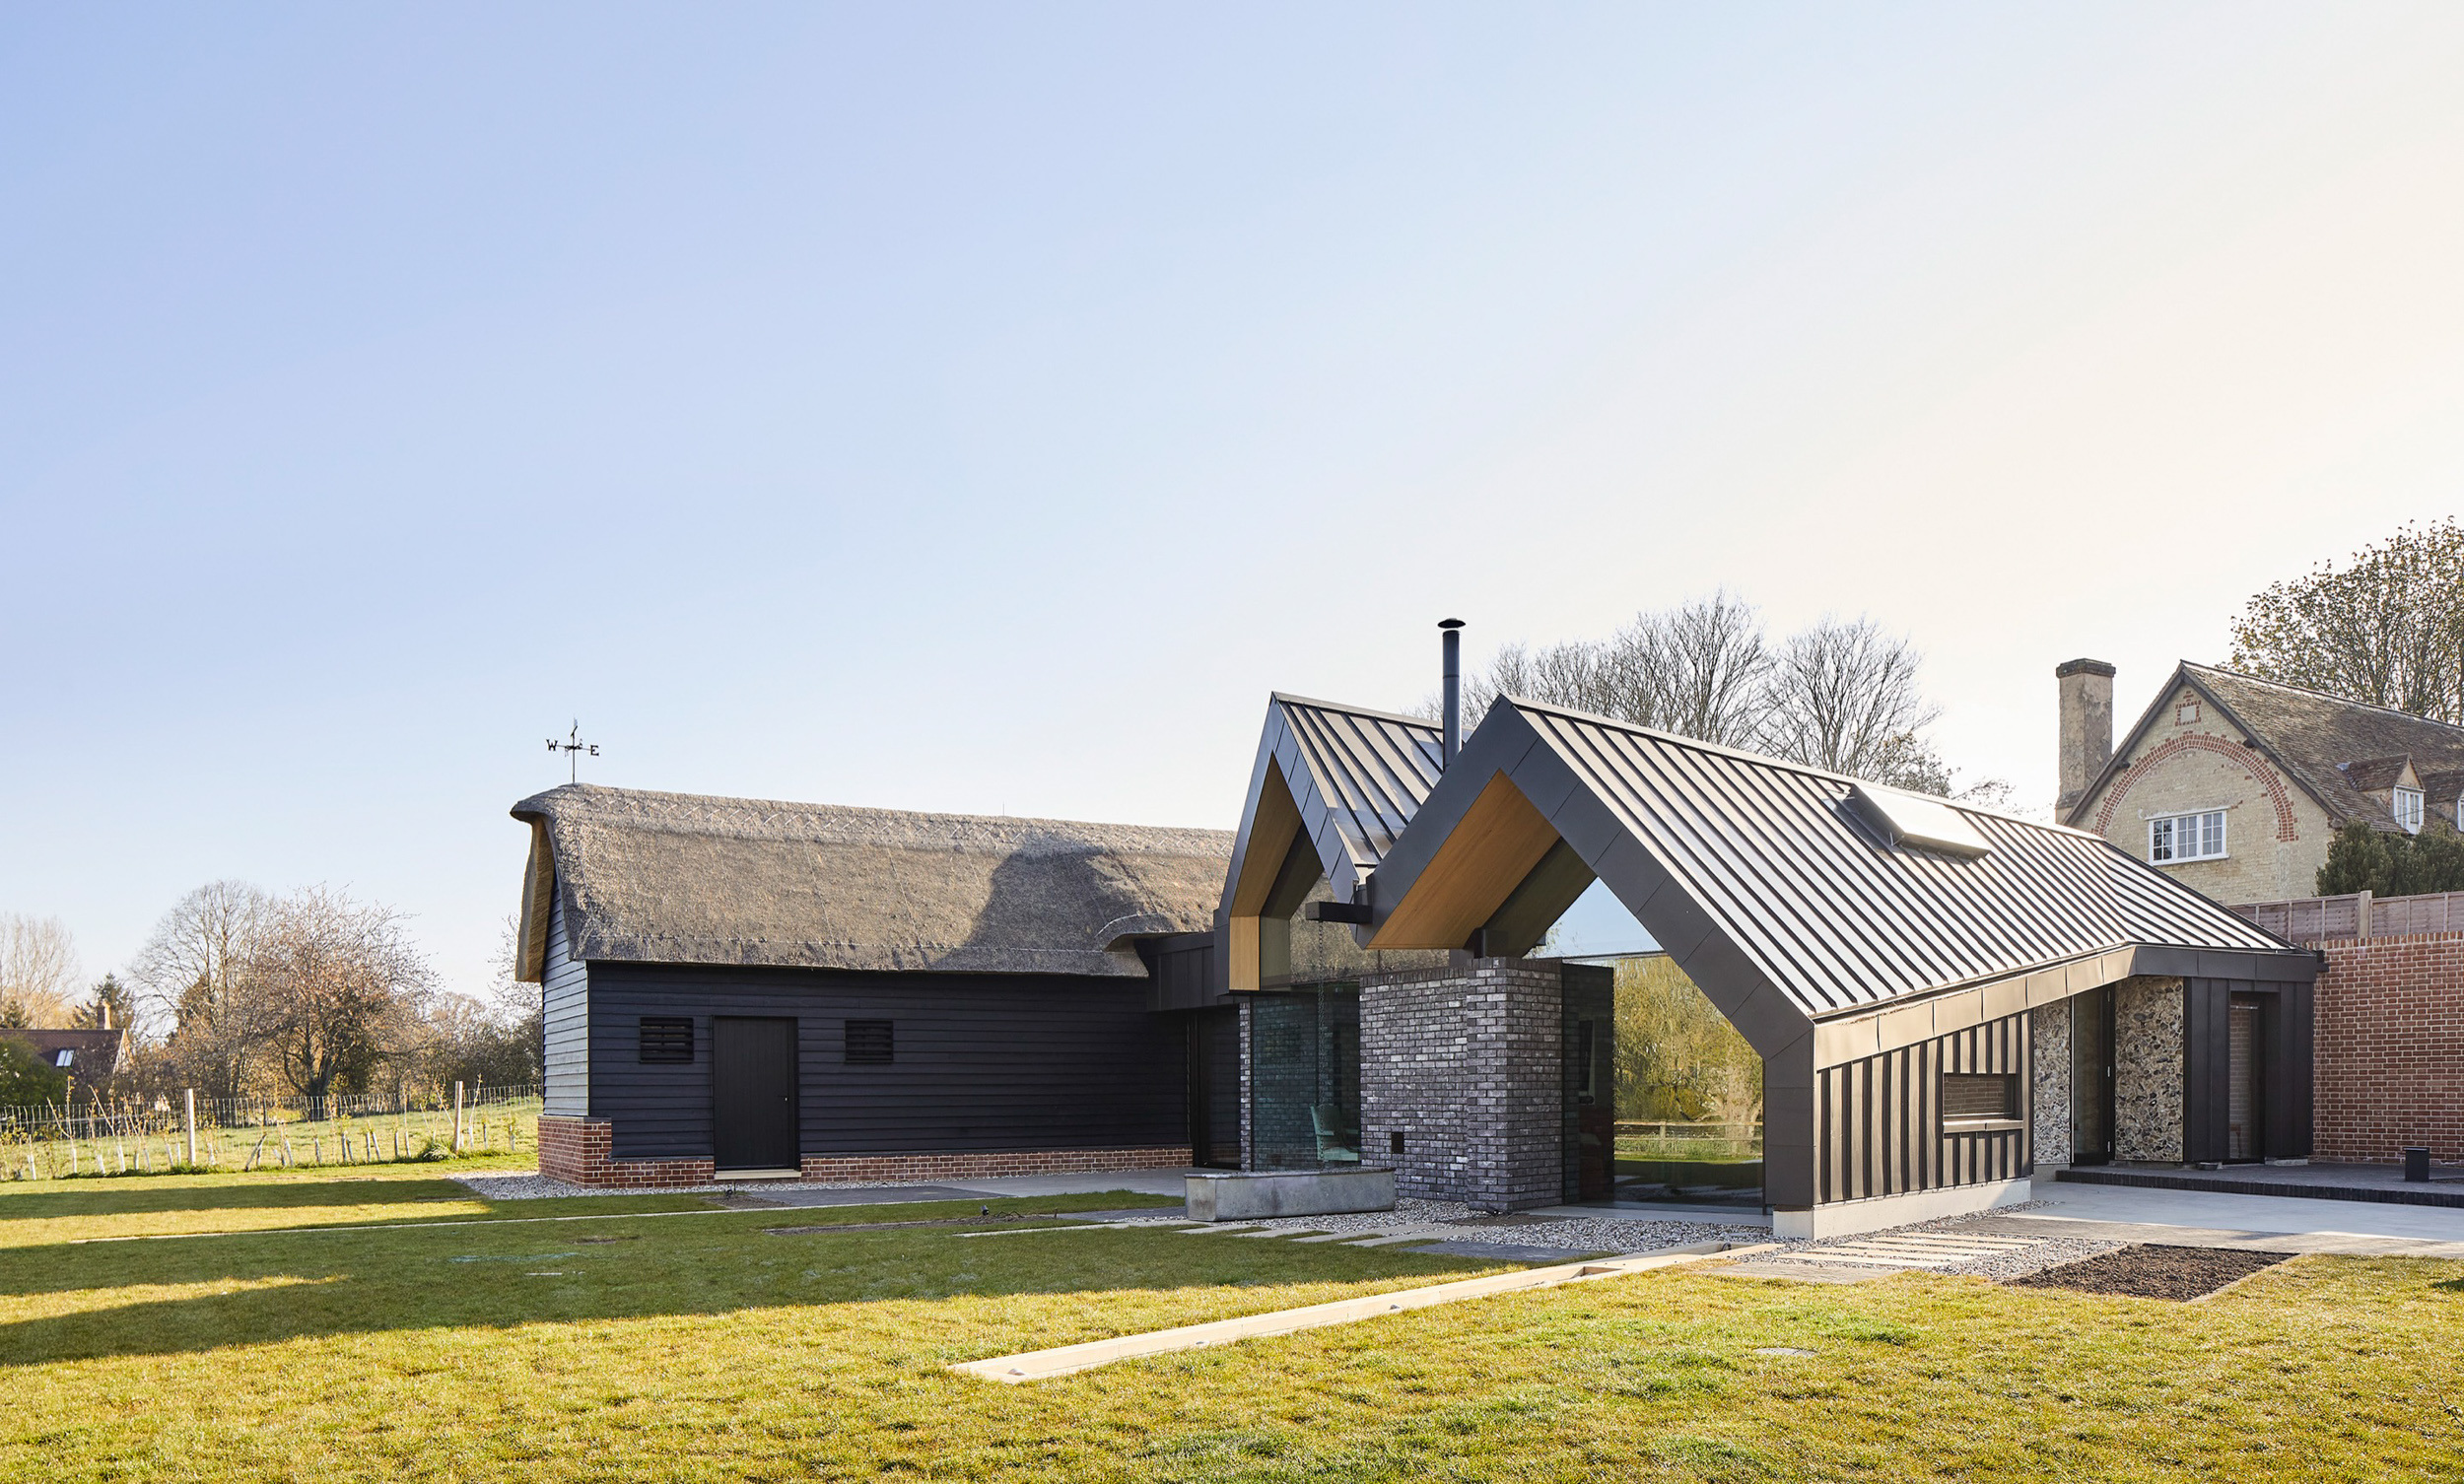 pitched zinc roofs meeting thatched roof at eye-level | cambridge architects CDC Studio